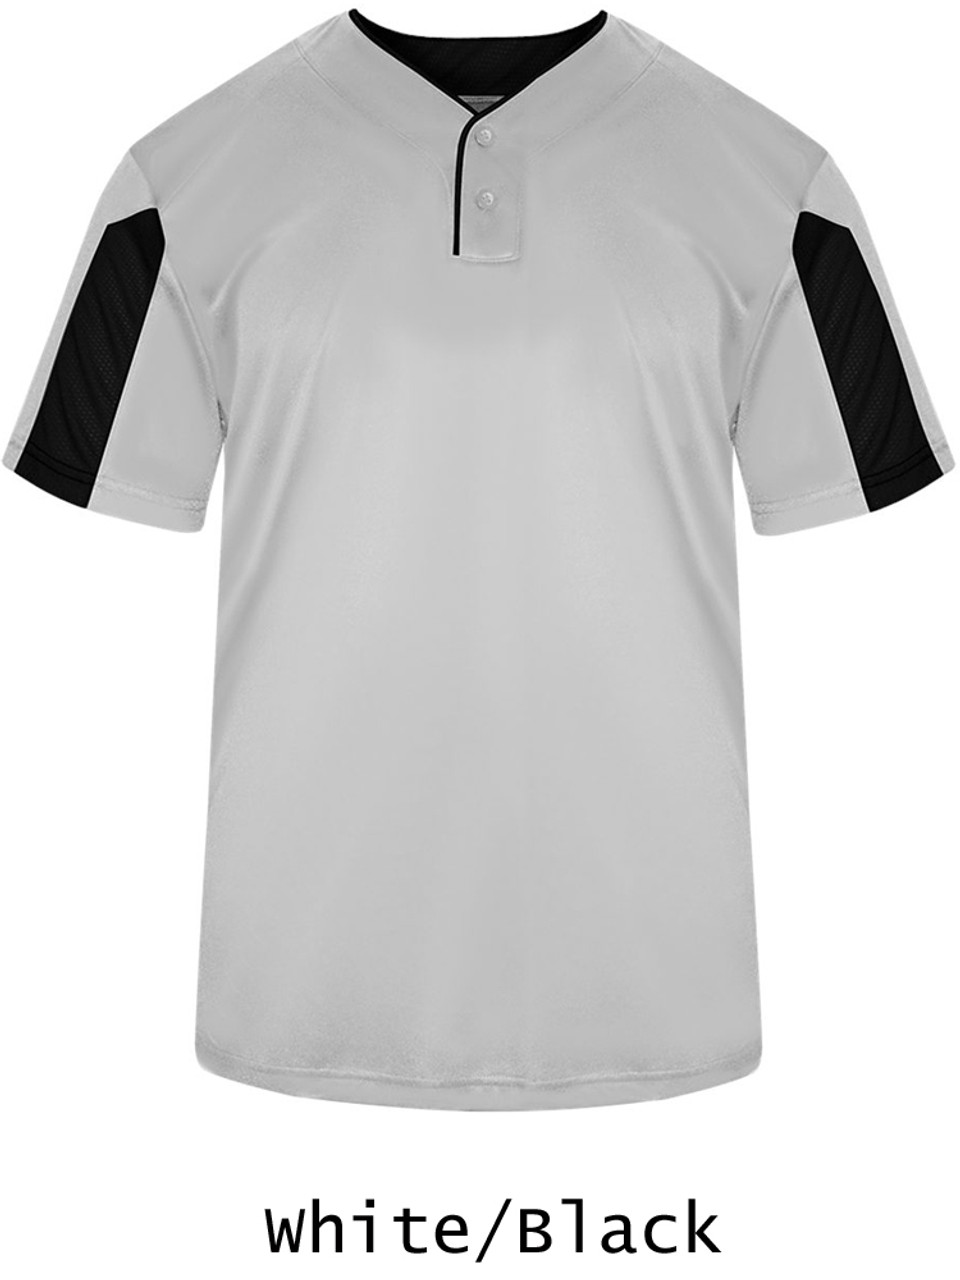 Paragon Softball Jersey Package - Youth & Adult